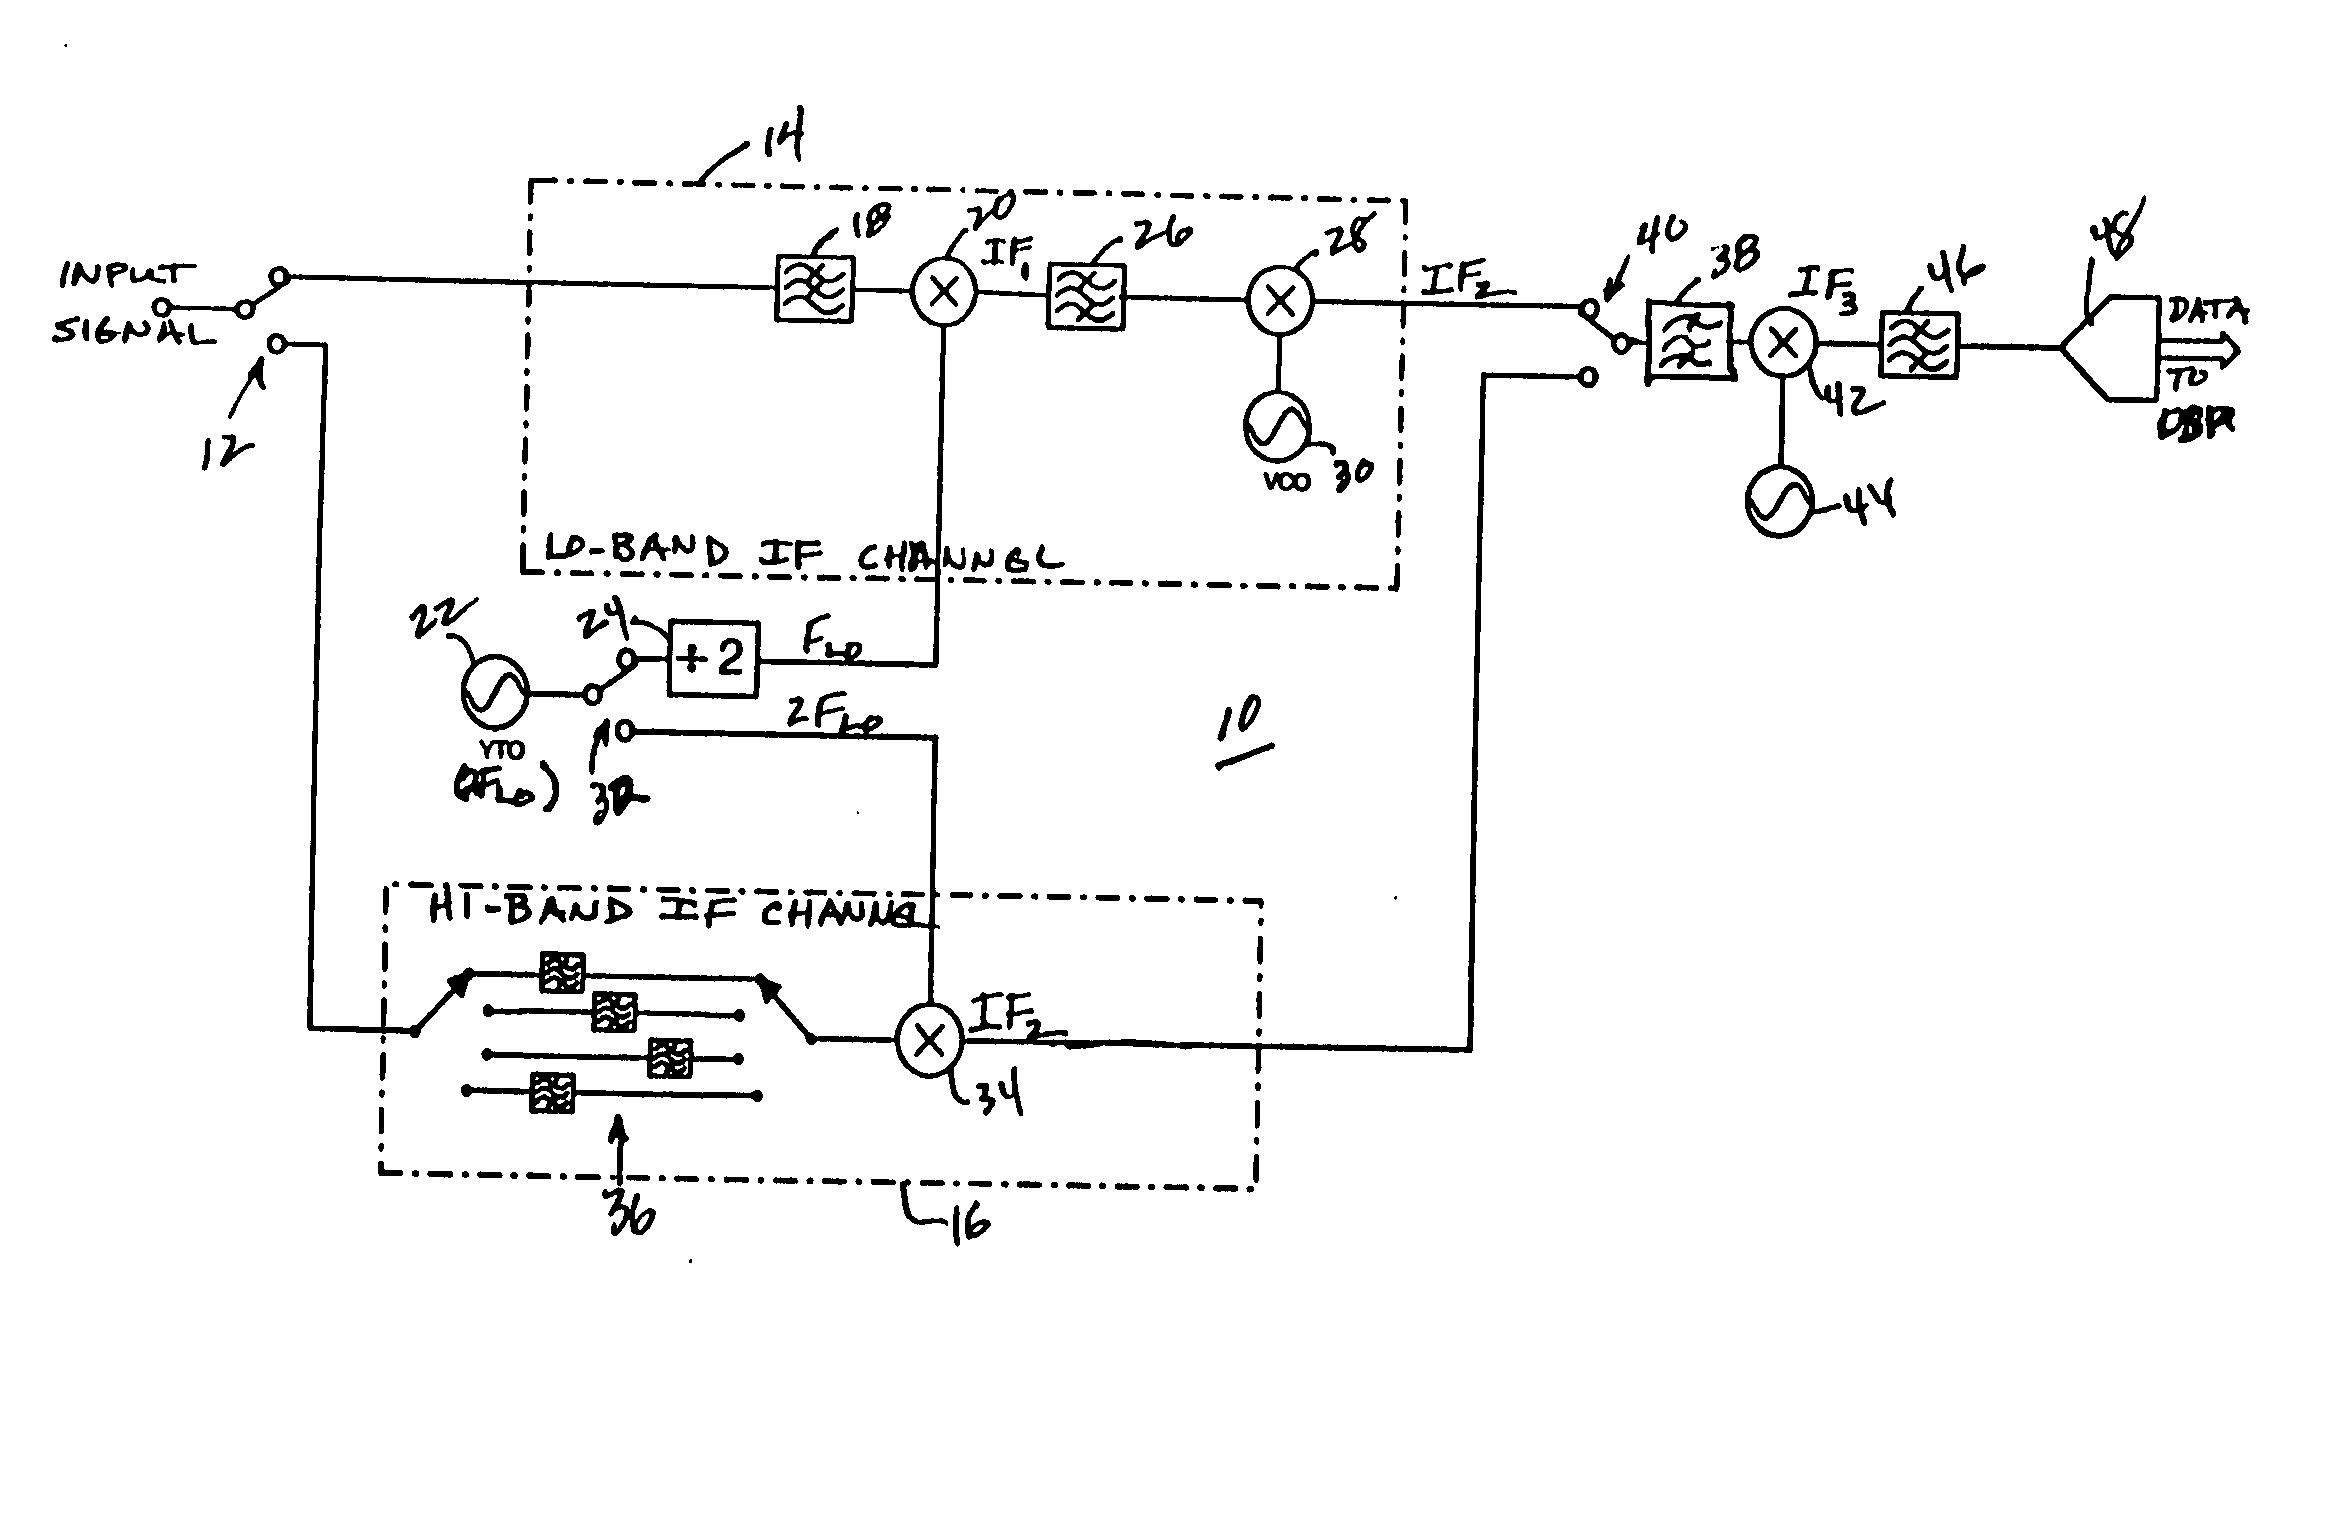 Use of a preselection filter bank and switched local oscillator counter in an instrumentation receiver